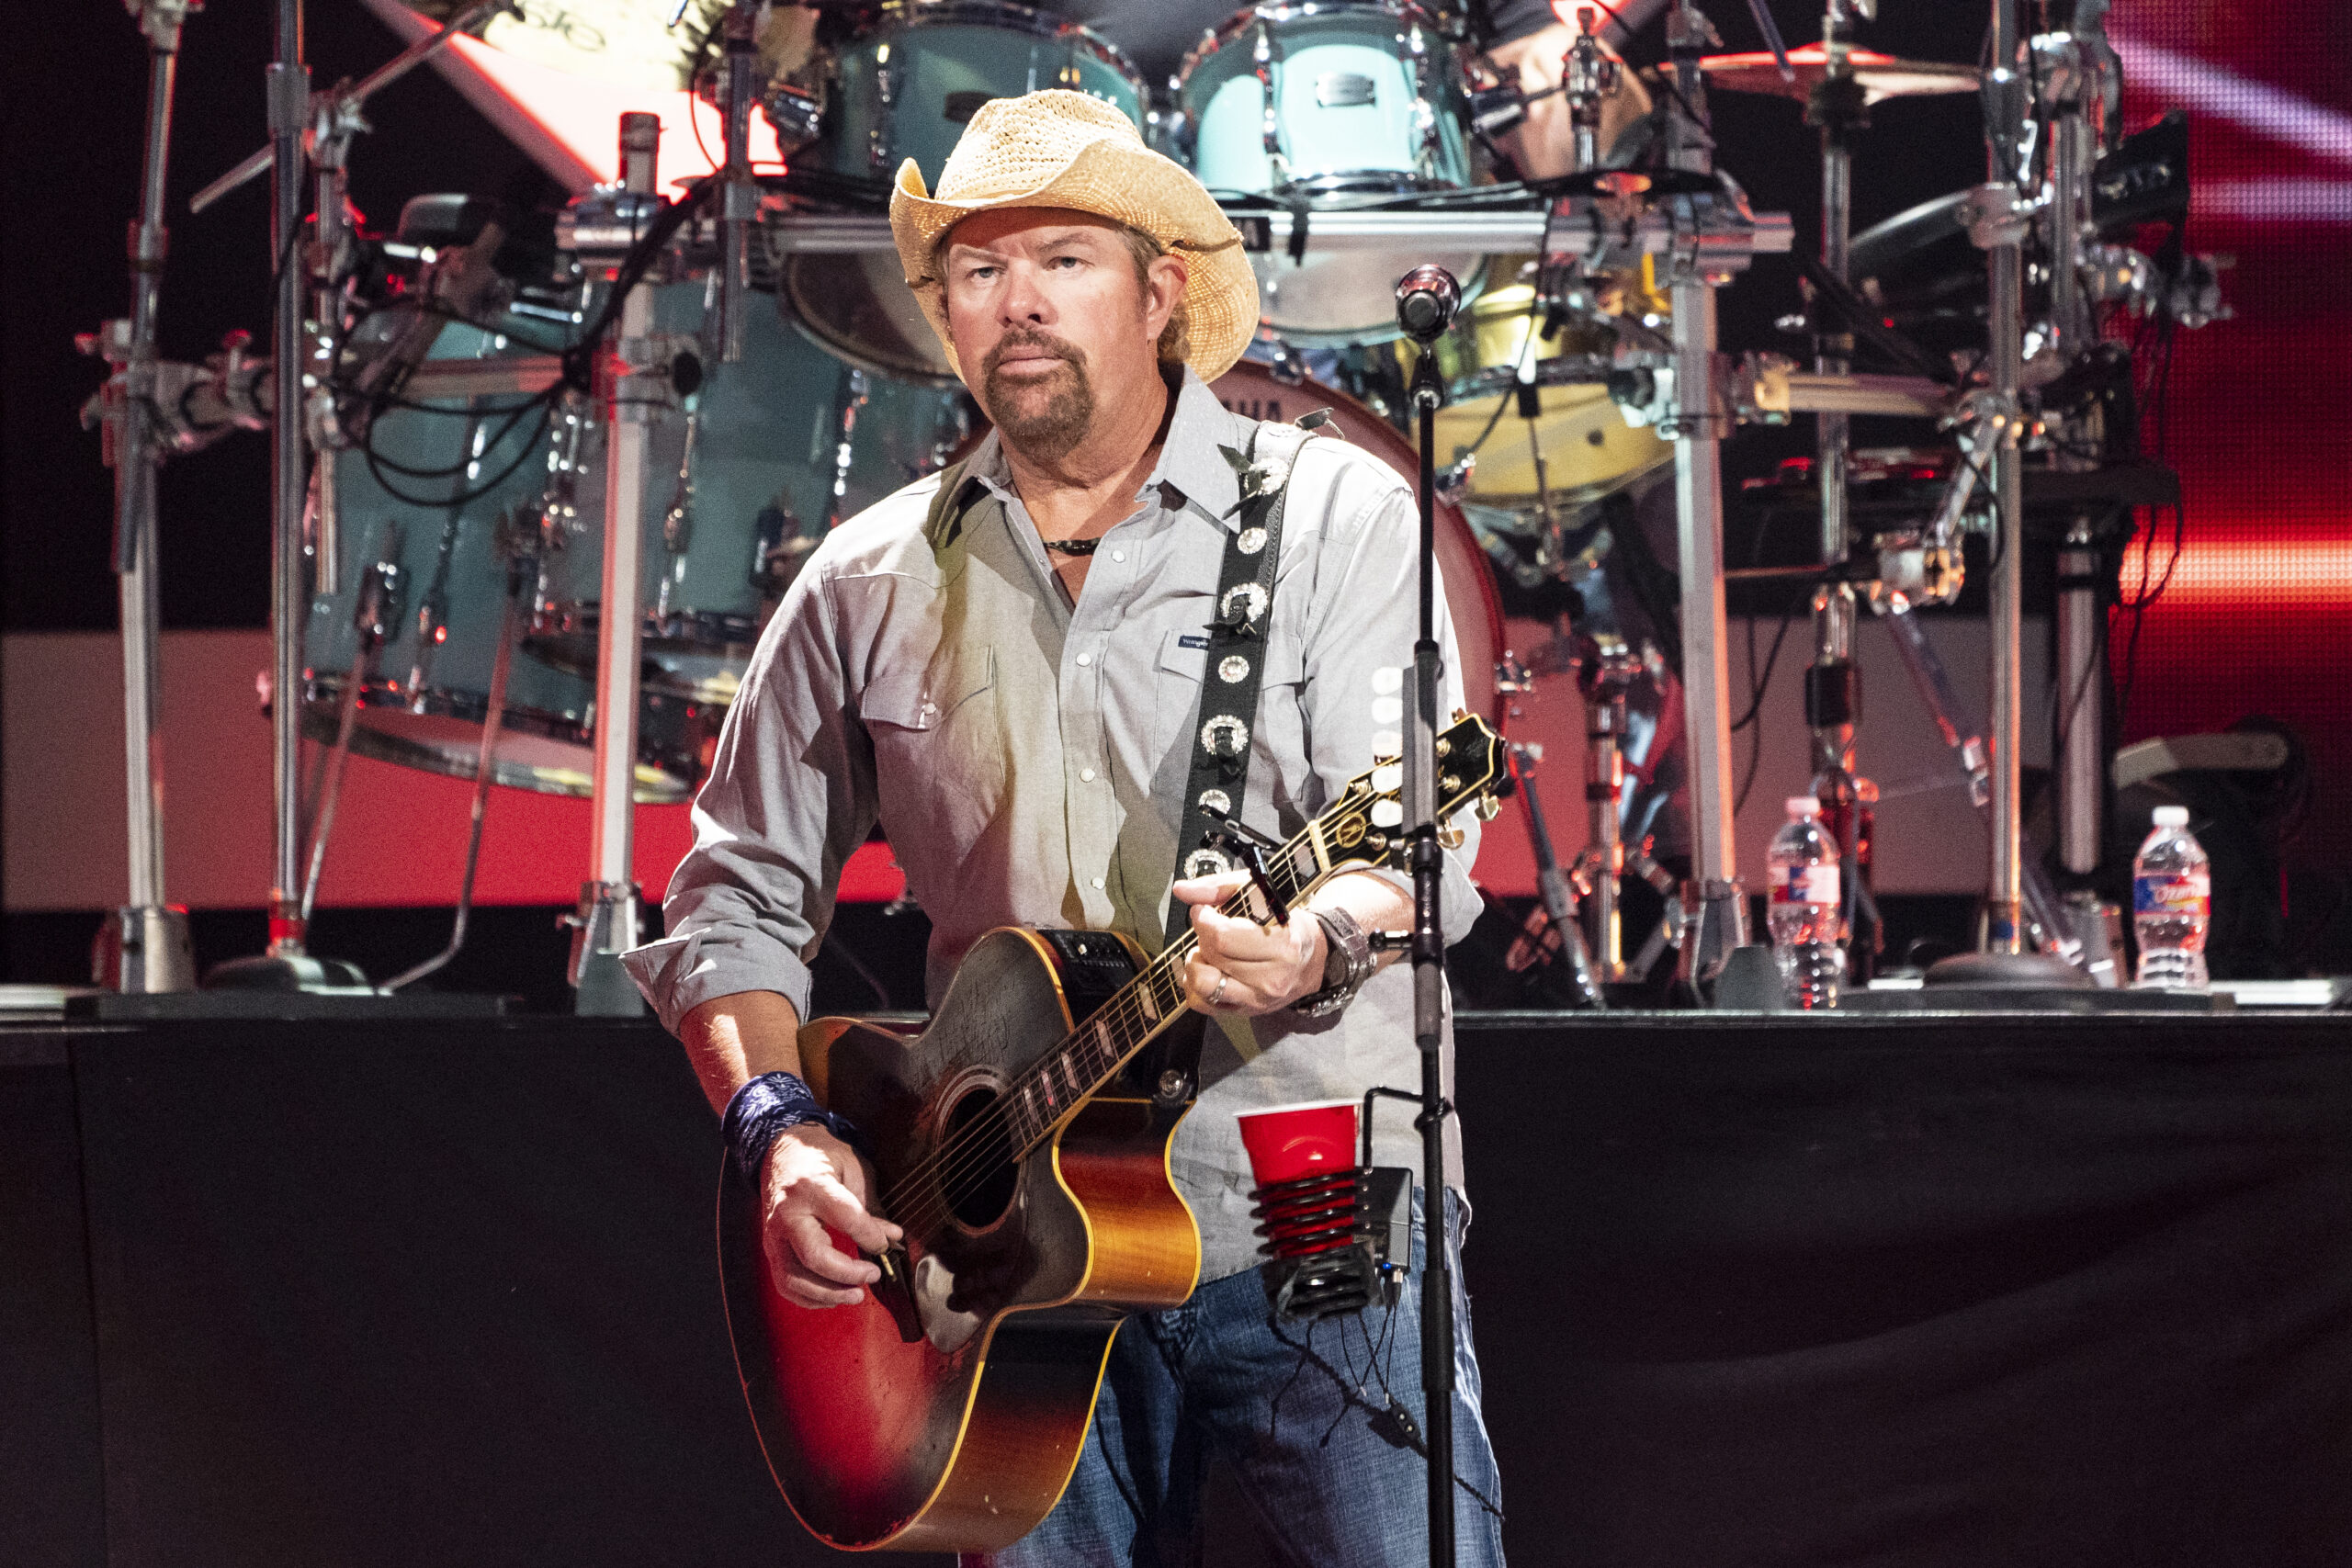 Toby Keith, 62, Country Music Star, Passes Away